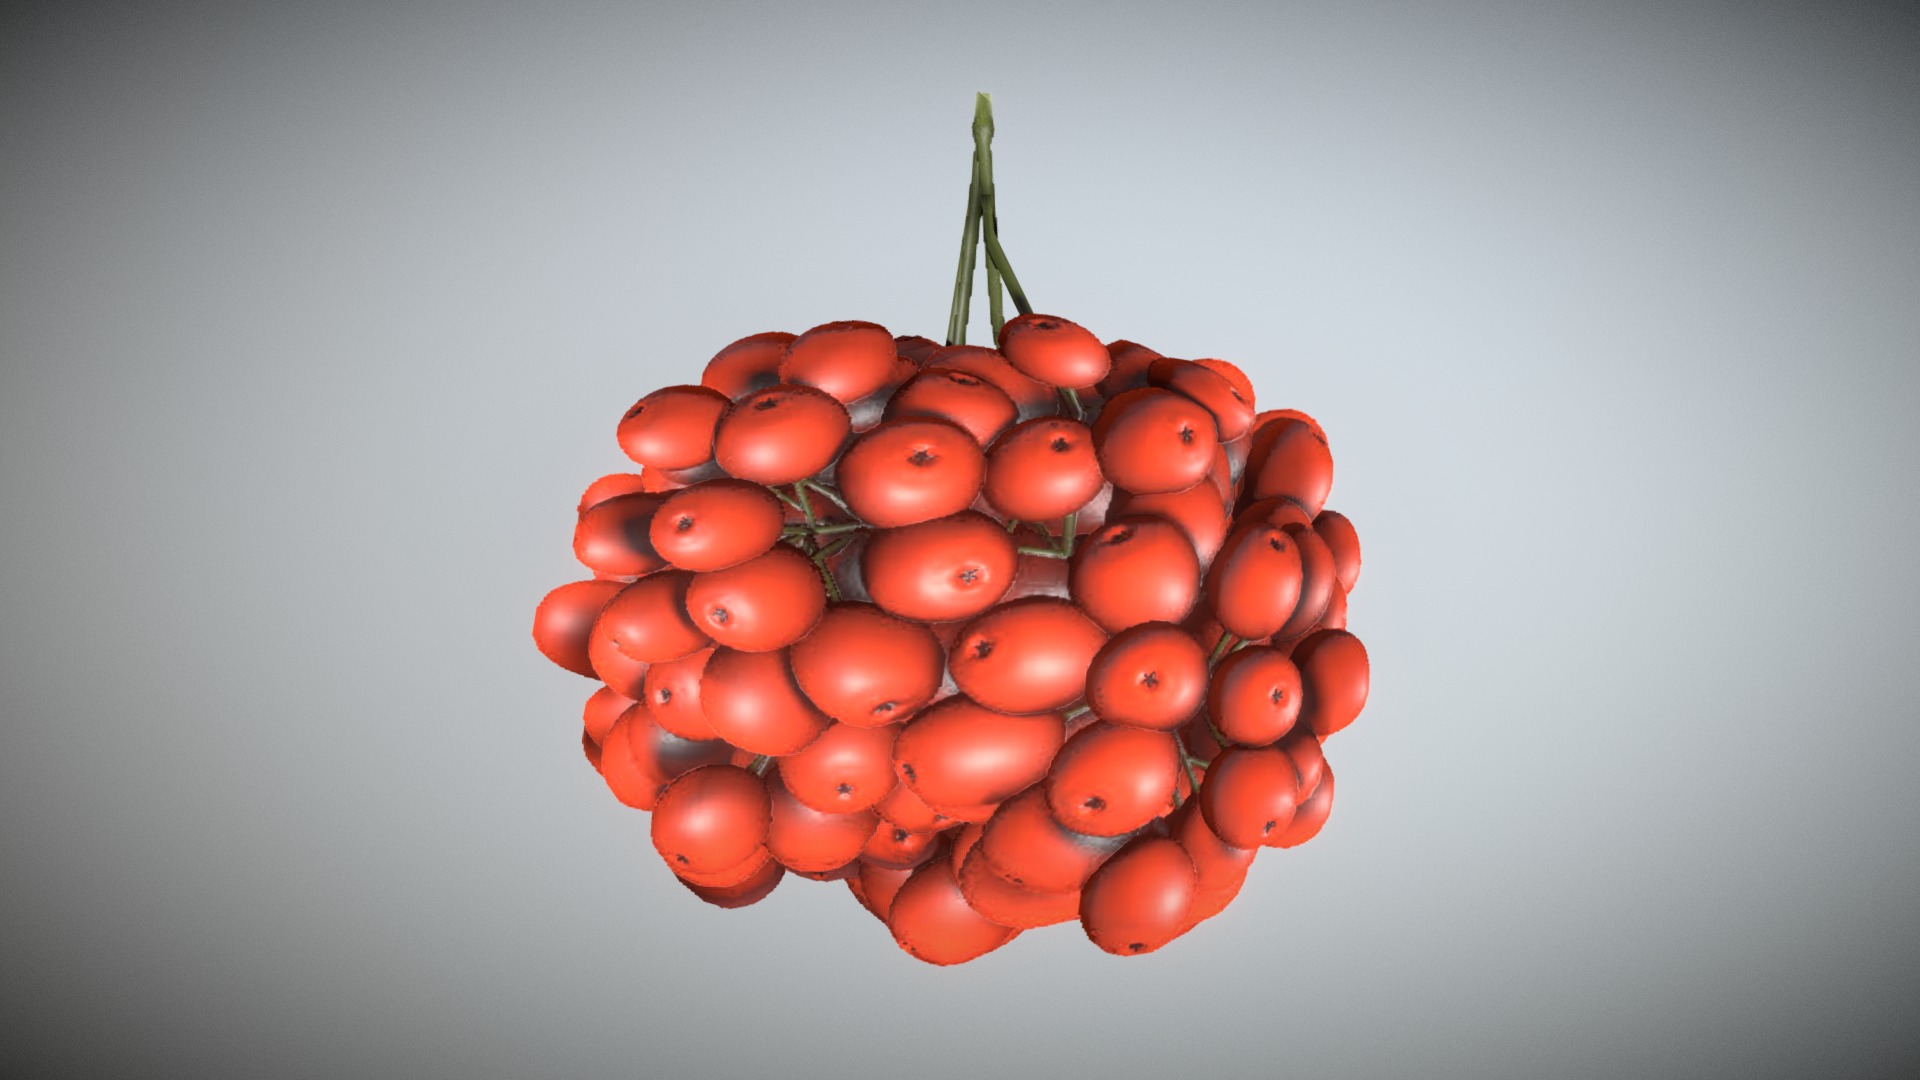 3D model Rowan Berries Low-Poly - This is a 3D model of the Rowan Berries Low-Poly. The 3D model is about a group of red tomatoes.